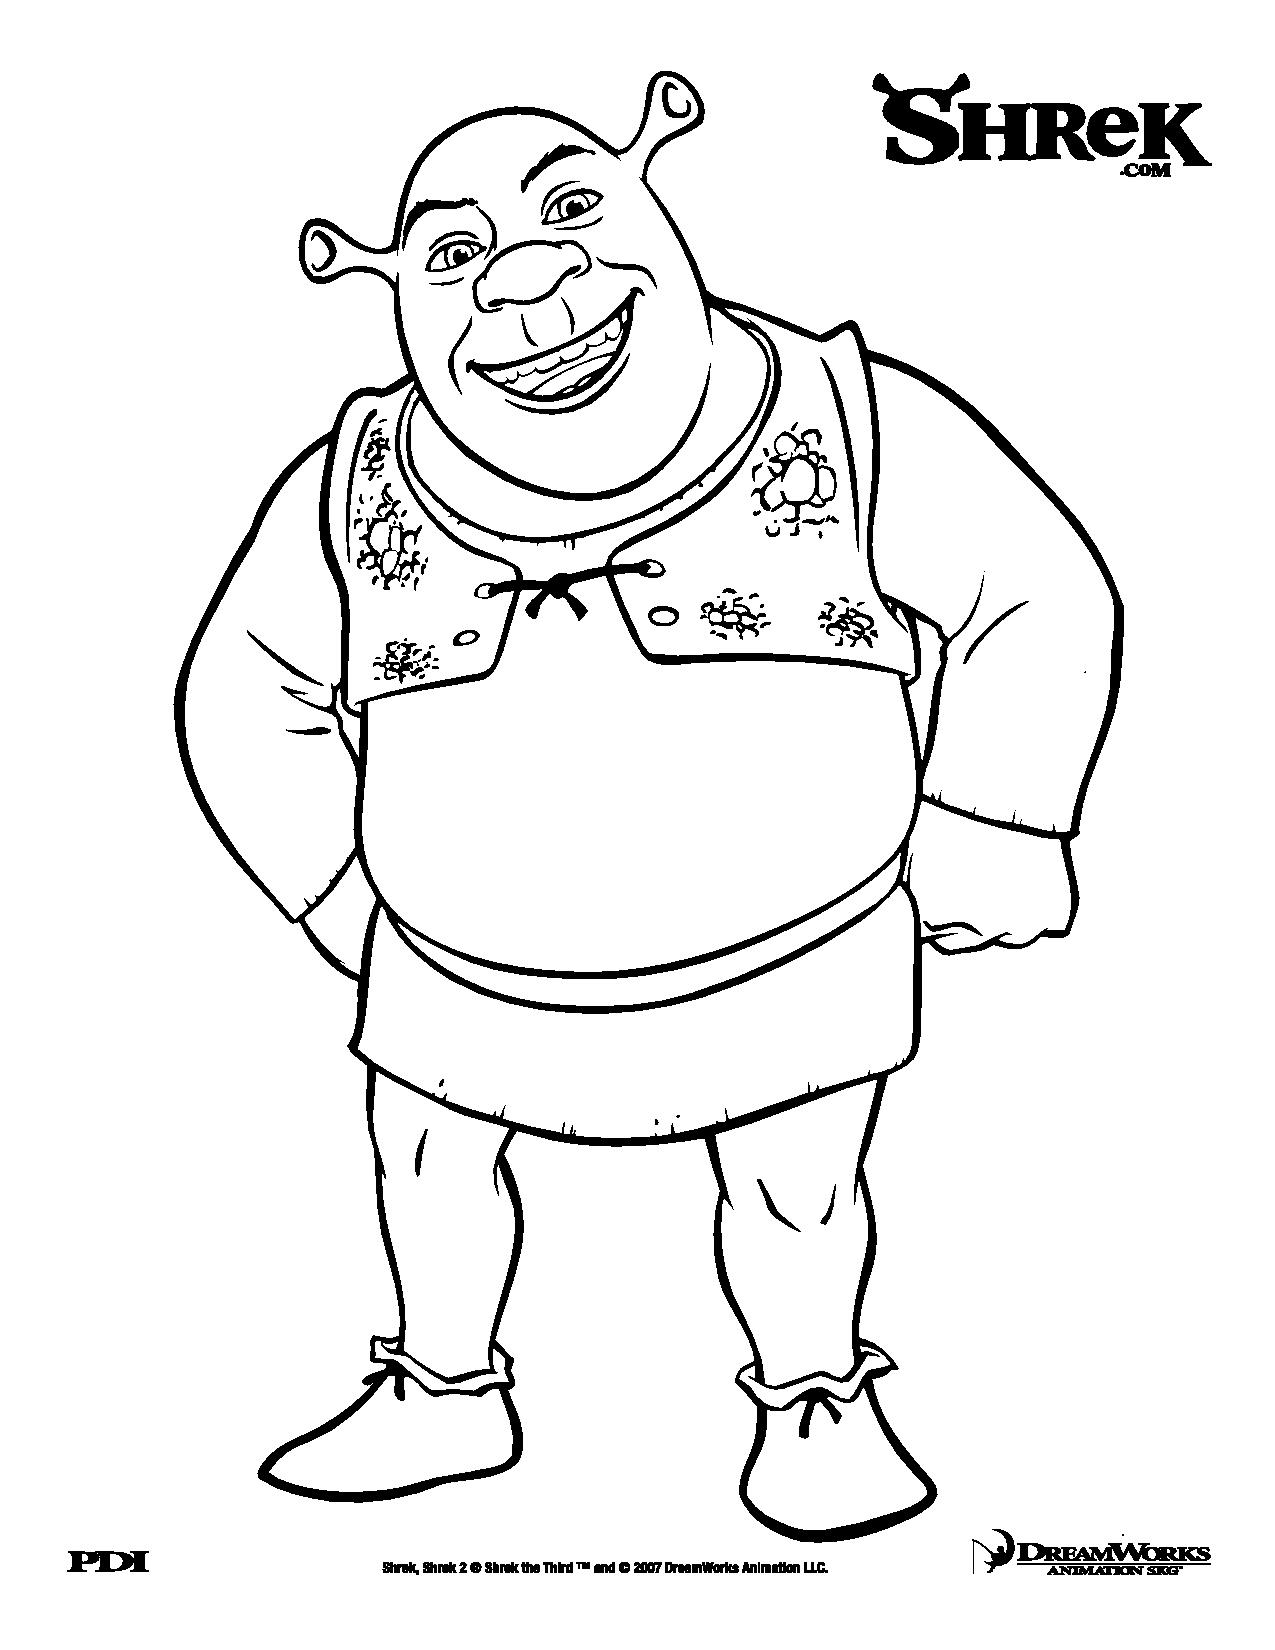 Free Shrek drawing to print and color - Shrek Kids Coloring Pages